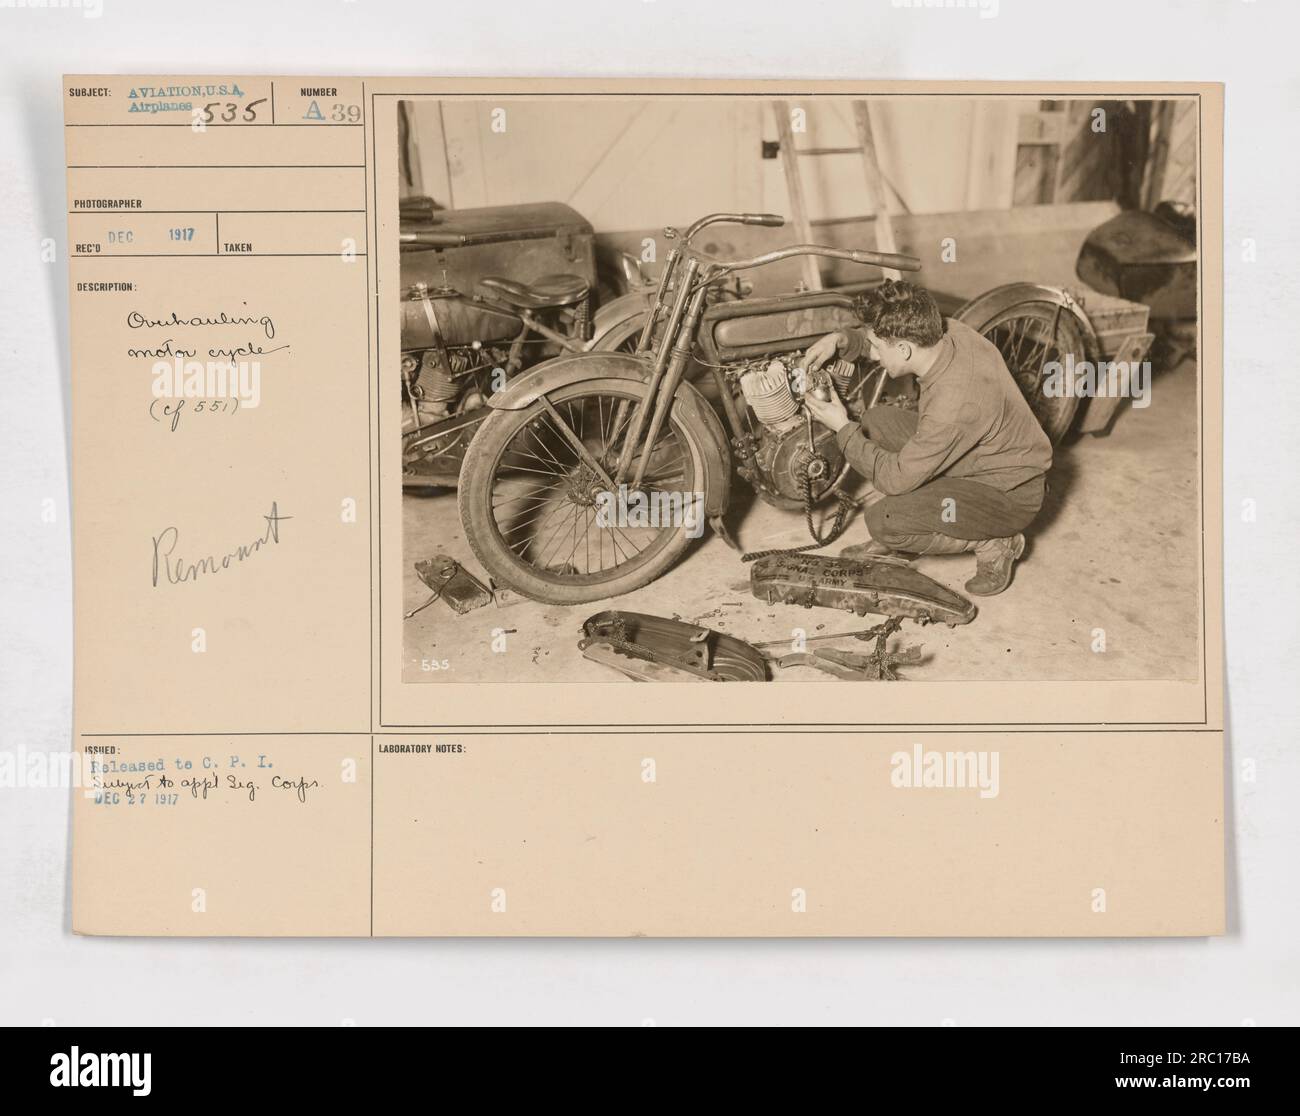 This photograph, numbered 111-SC-535, depicts the use of motorcycles for transportation between planes and photographic developers during World War One. The image was taken in 1917 as part of the U.S.A Airplanes 535 series. It shows a motorcycle being repaired (ef 551) for this purpose. The photograph was released to the C.P.I. (Central News Photo Service) on December 27, 1917. Stock Photo